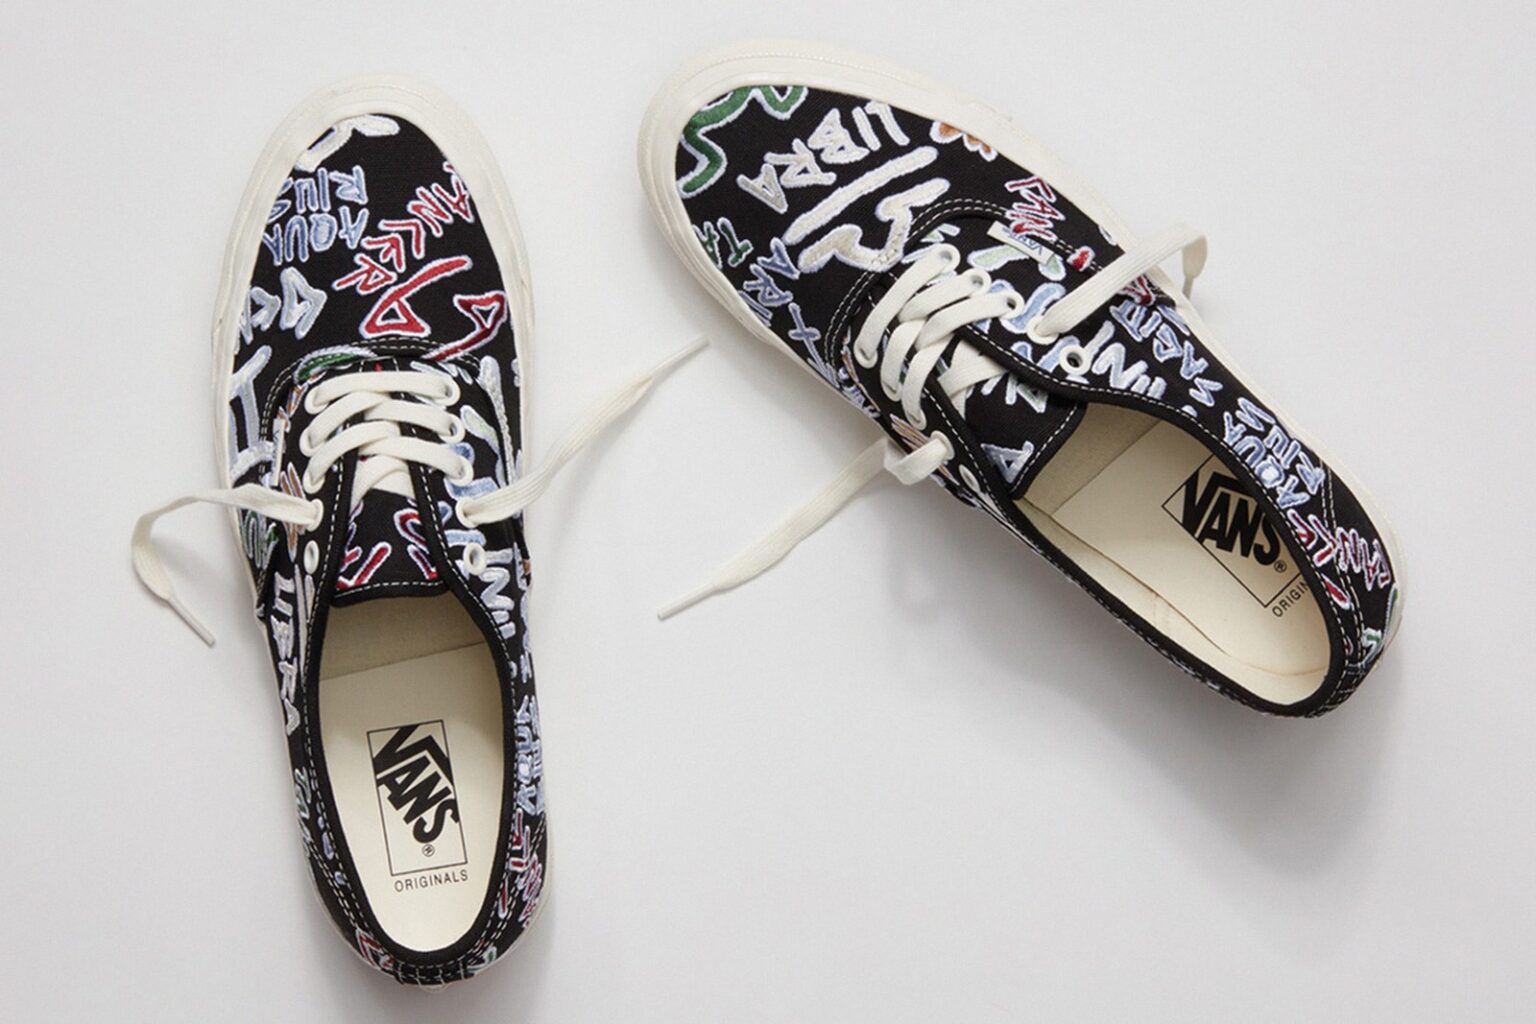 vans-og-authentic-lx-zodiac-release-date-price-07-1536x1024